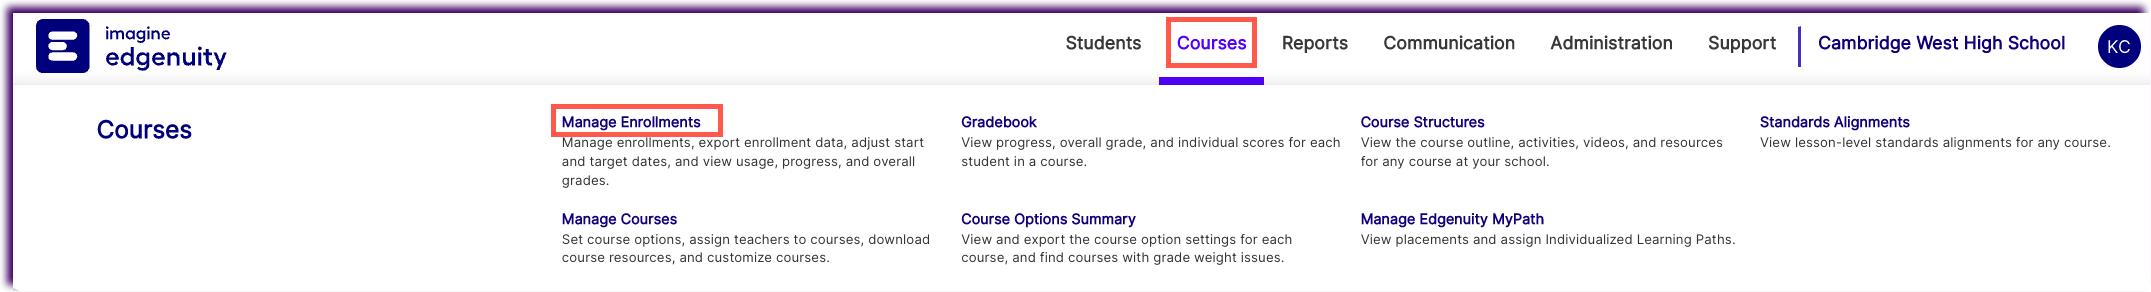 IE-Courses-ManageEnrollments.png